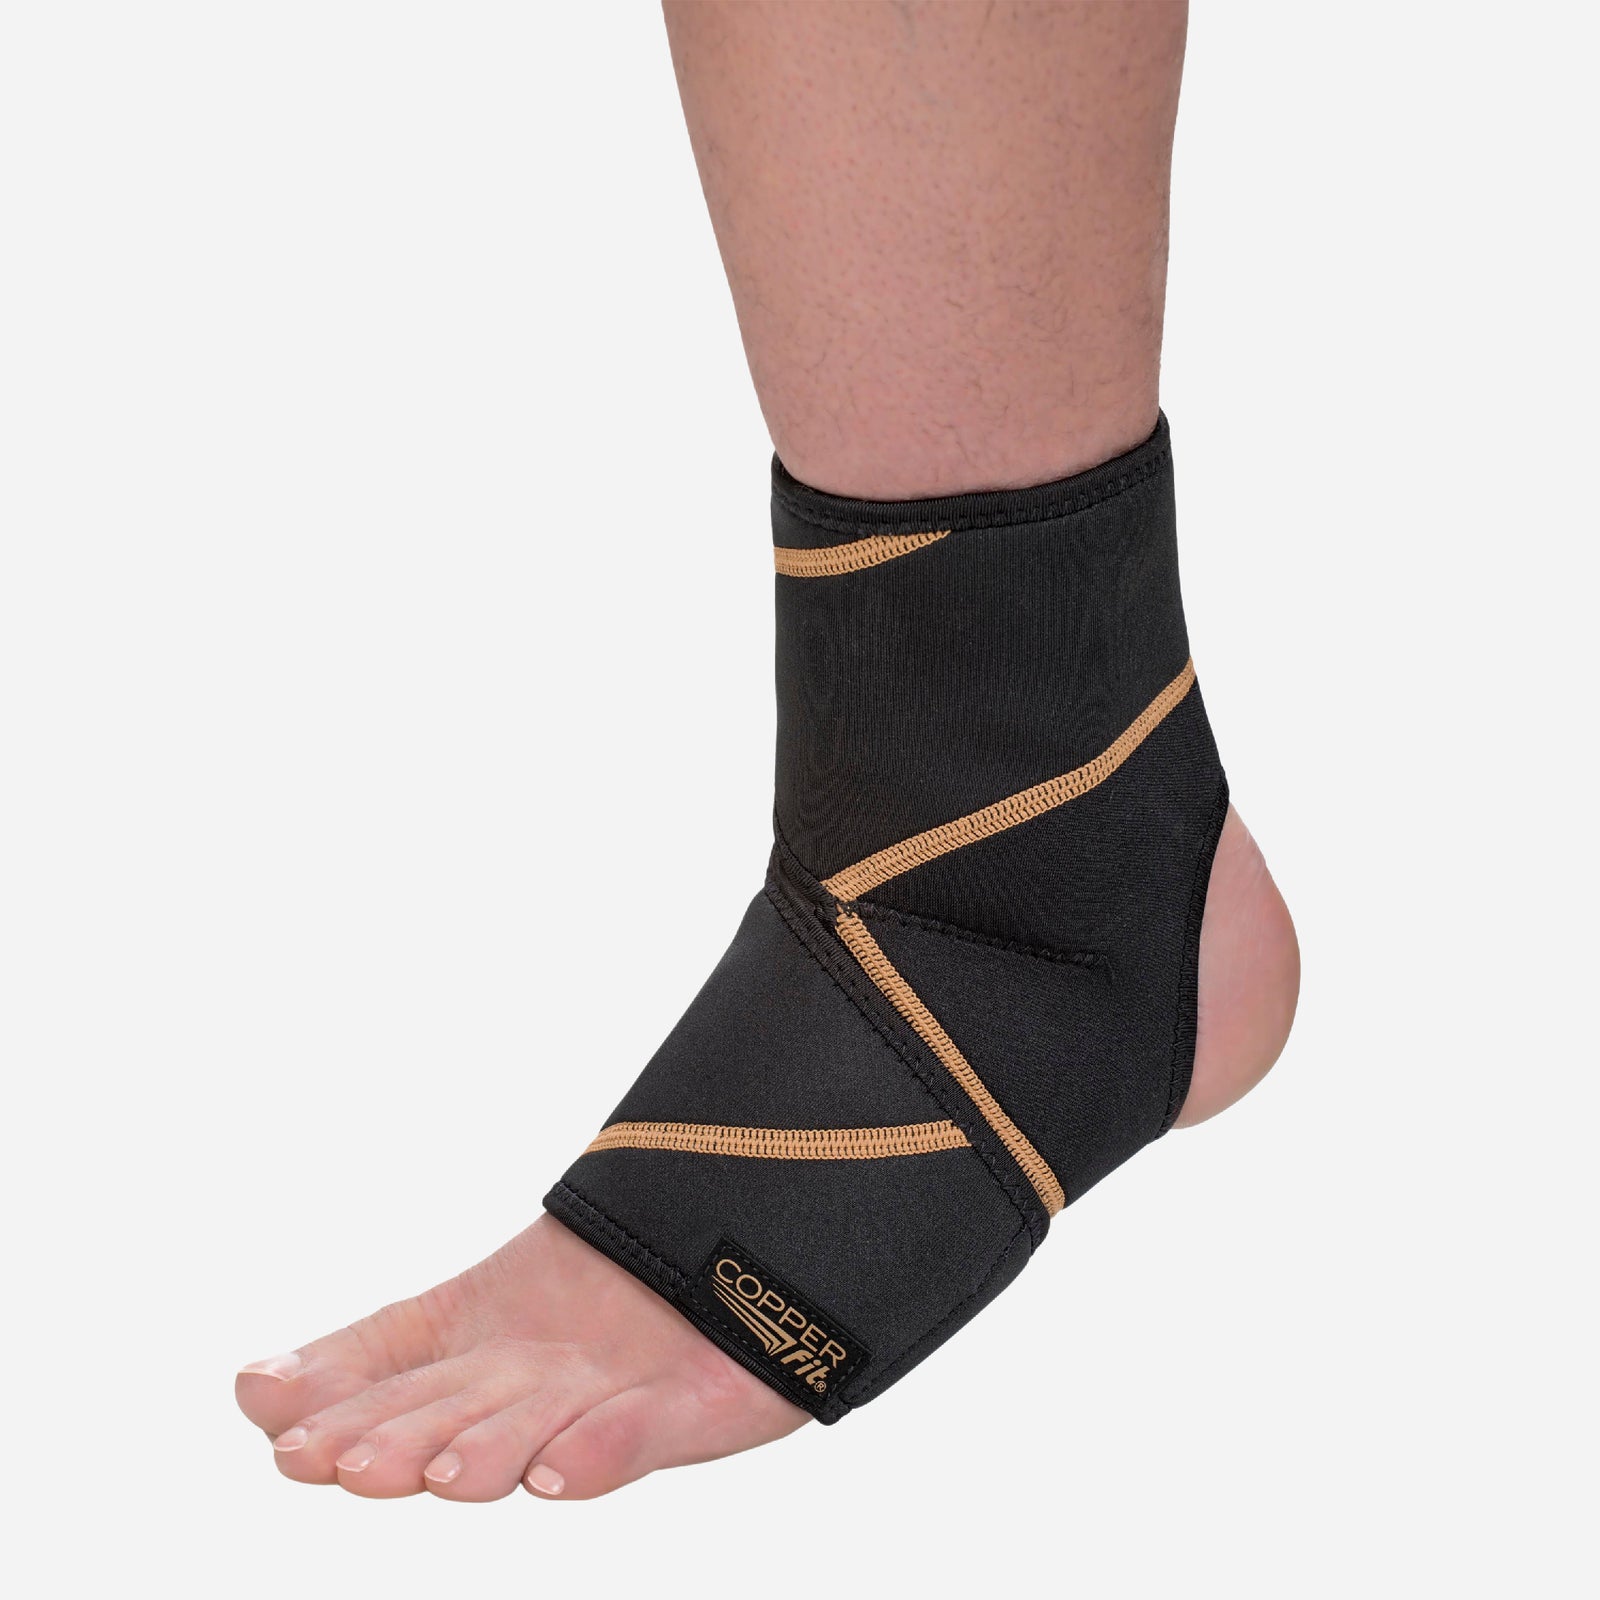 Copper Compression Copper Arch Support - 2 Plantar Fasciitis  Braces/Sleeves. GUARANTEED Highest Copper Content. Foot Care, Heel Spurs,  Feet Pain, Flat Arches (1 PAIR Black - One Size Fits All) : 